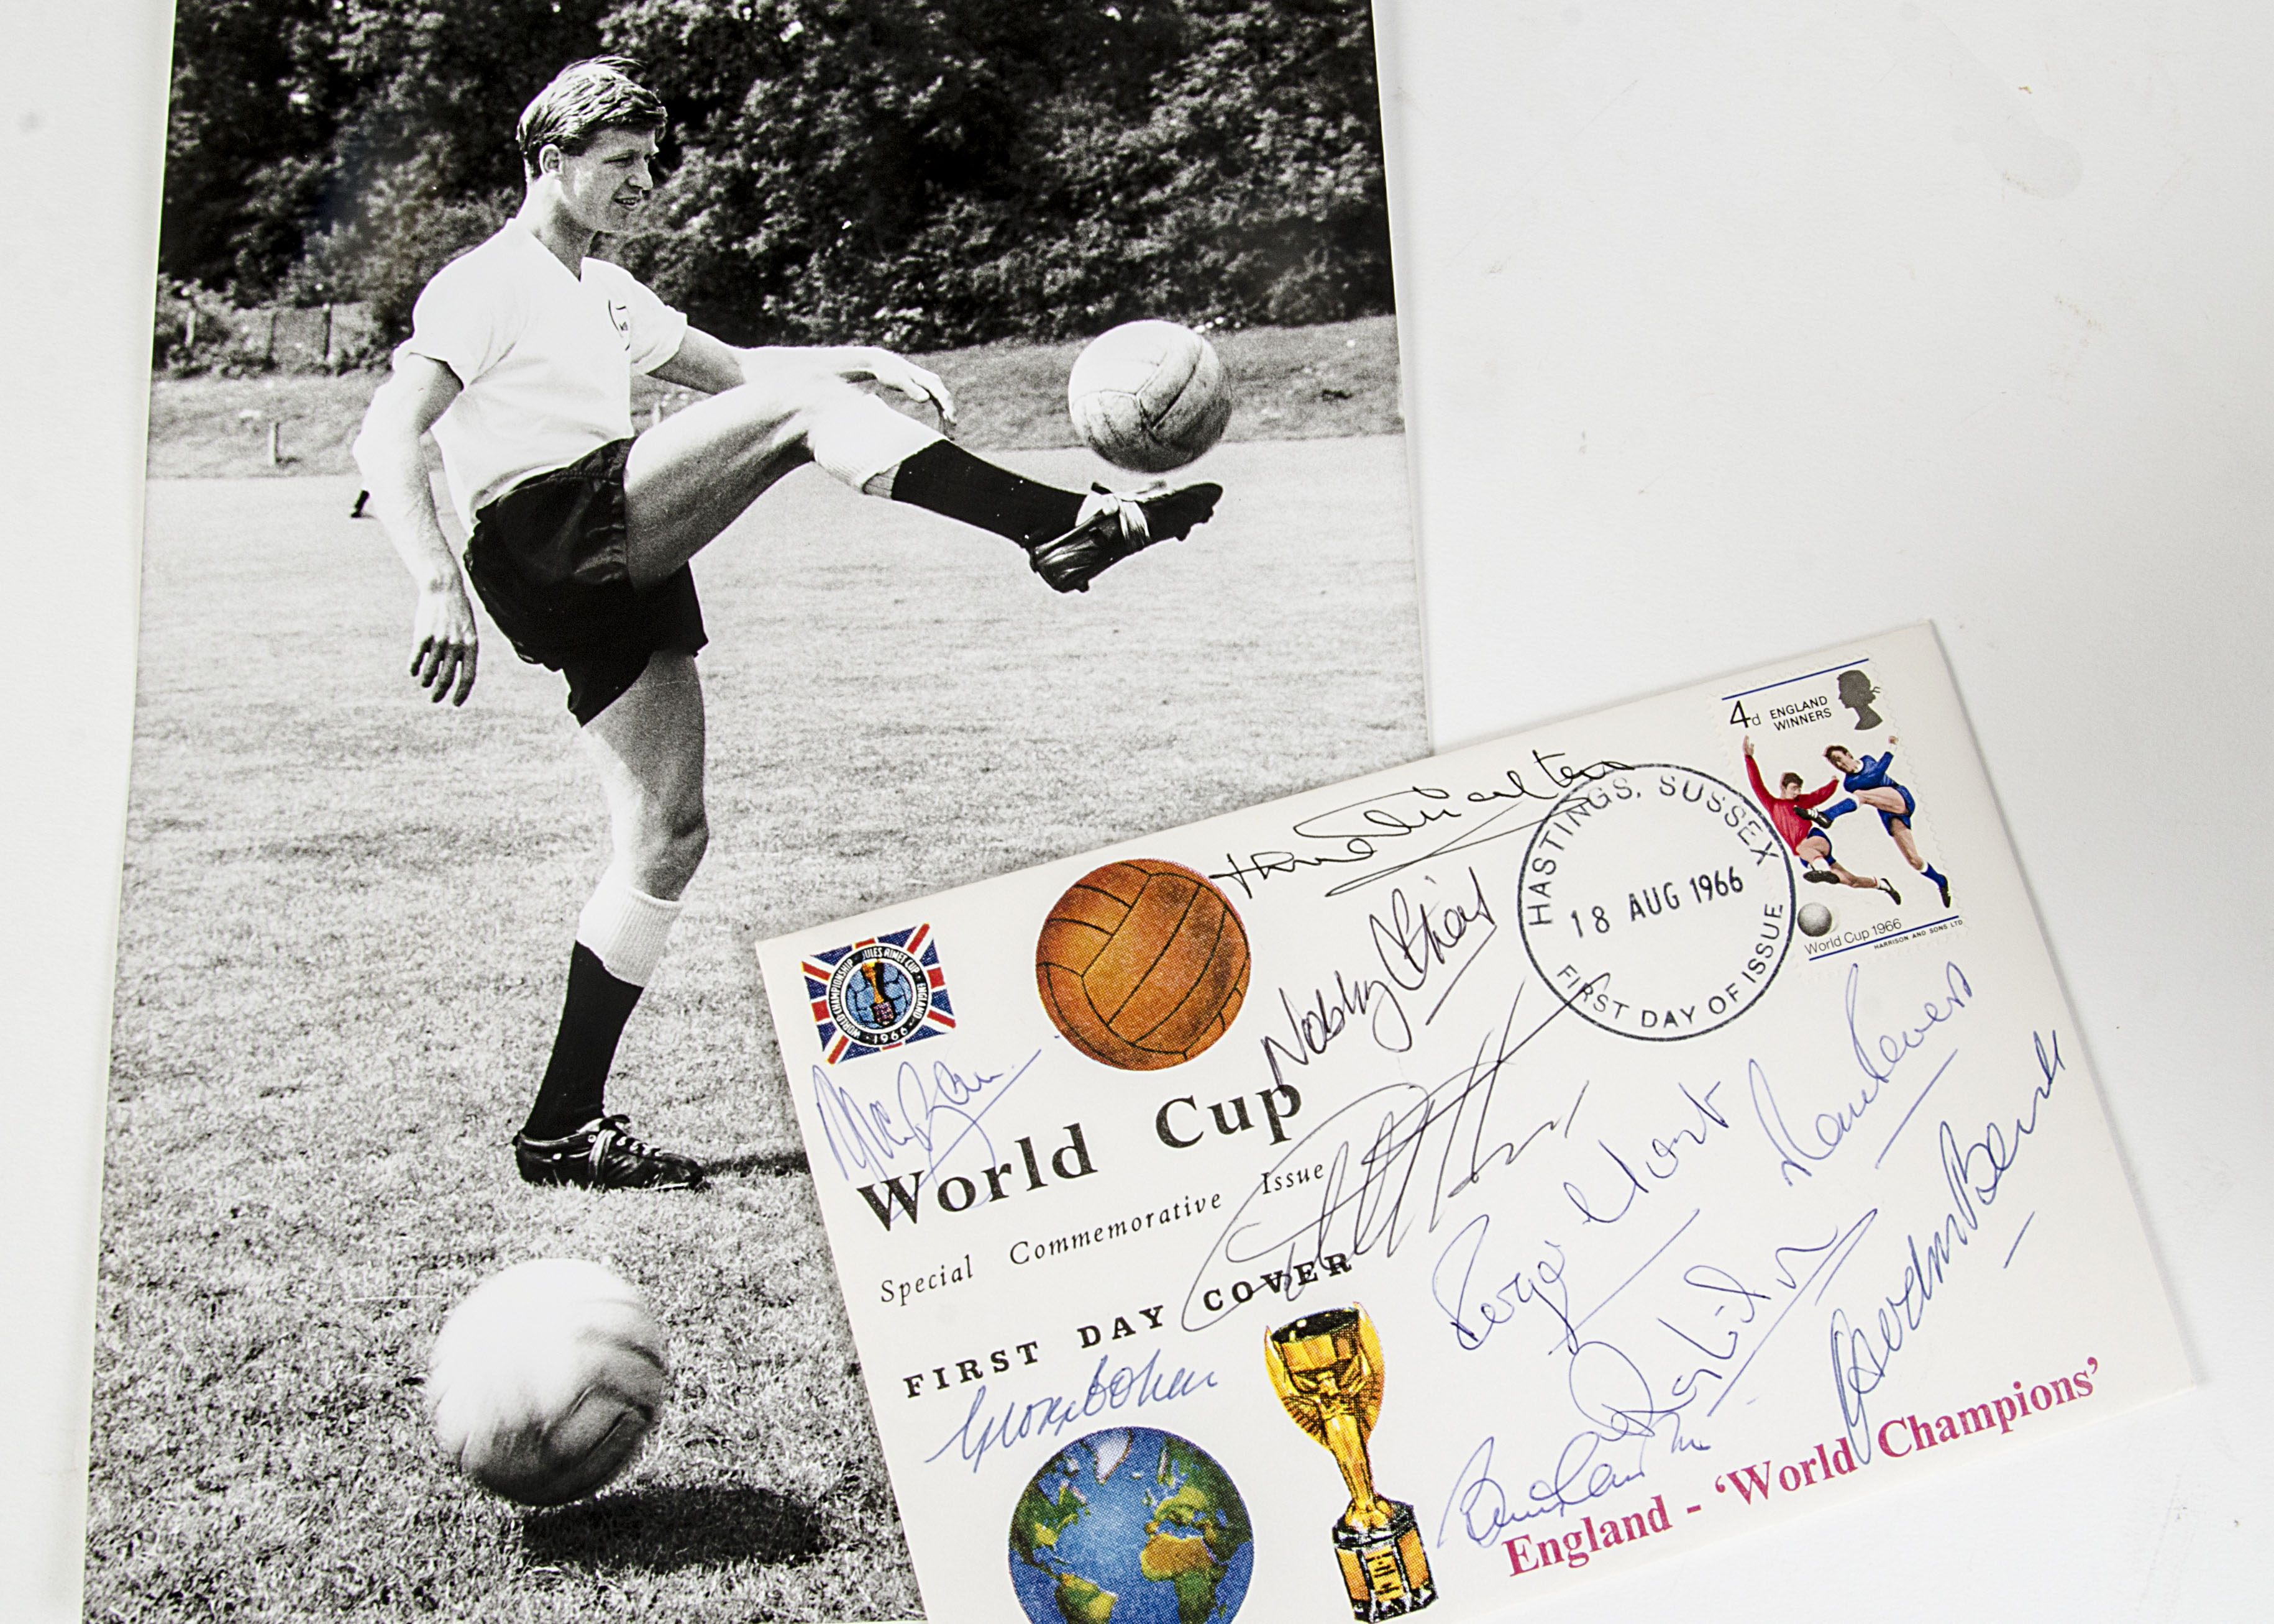 World Cup, two photgraphs from the 1966 final, Geoff Hurst scoring and holding the trophy plus a